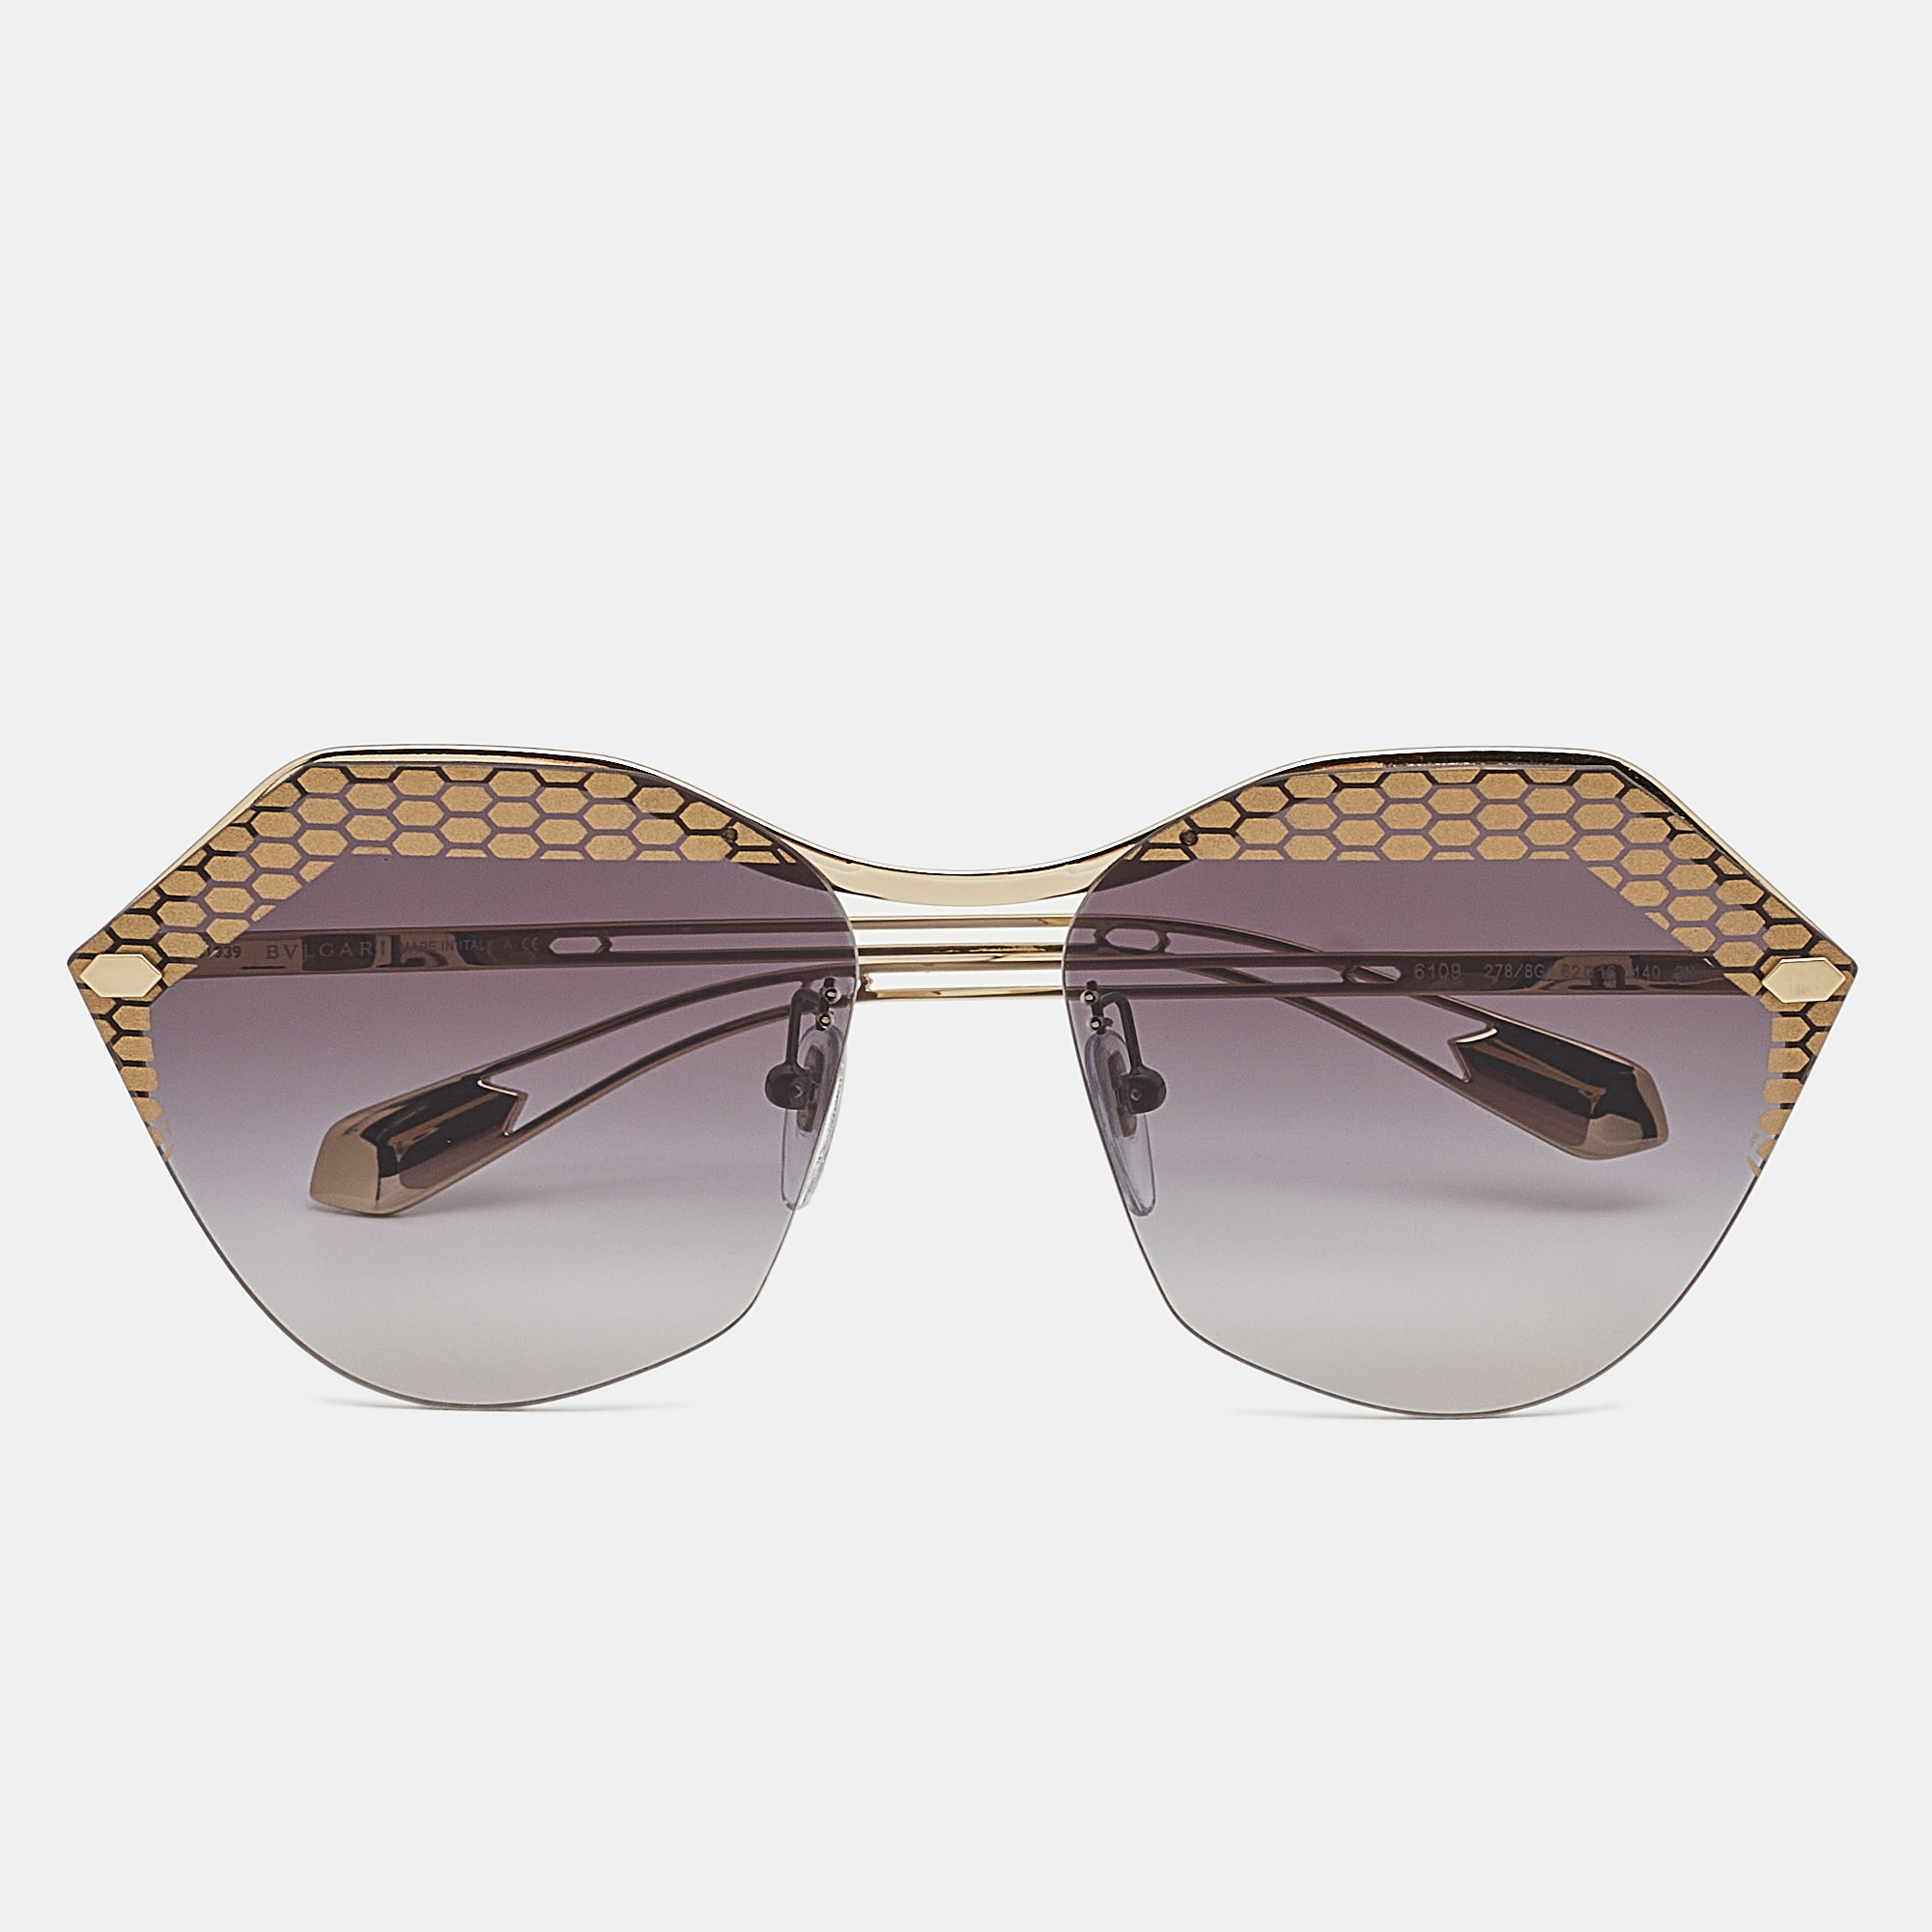 Delve into the world of exquisite eyewear with the Bvlgari Serpenti sunglasses. Crafted with meticulous attention to detail these sunglasses boast a sleek blackand gold frame adorned with the iconic Bvlgari Serpenti motif exuding luxury and timeless style.